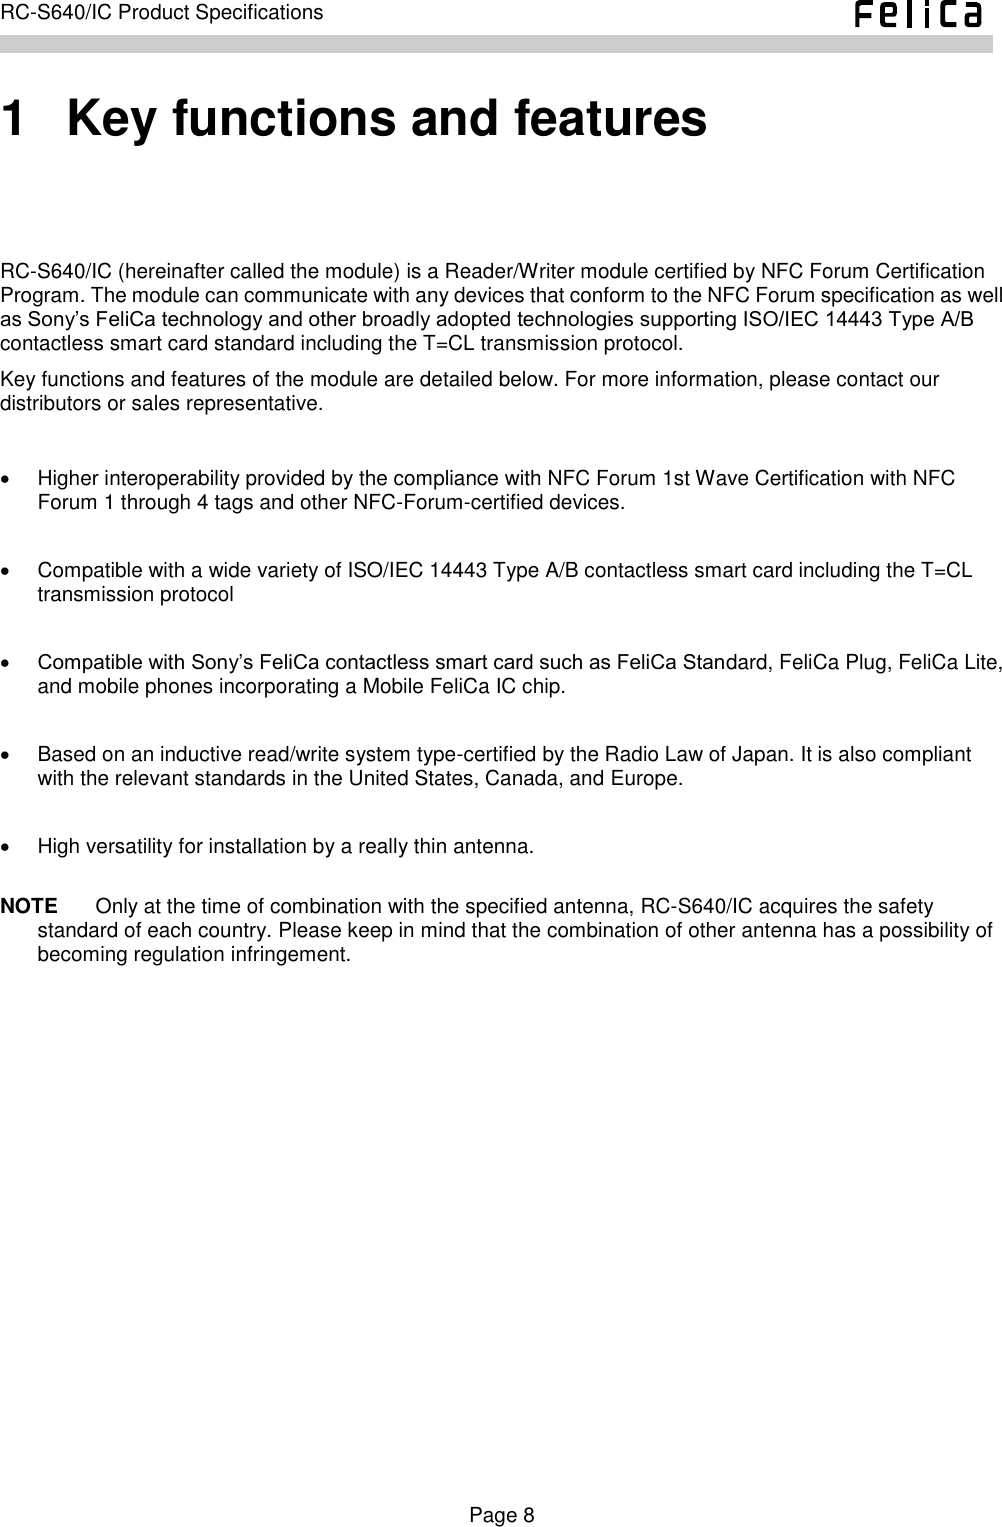    Page 8     RC-S640/IC Product Specifications    1   Key functions and features RC-S640/IC (hereinafter called the module) is a Reader/Writer module certified by NFC Forum Certification Program. The module can communicate with any devices that conform to the NFC Forum specification as well as Sony’s FeliCa technology and other broadly adopted technologies supporting ISO/IEC 14443 Type A/B contactless smart card standard including the T=CL transmission protocol. Key functions and features of the module are detailed below. For more information, please contact our distributors or sales representative.    Higher interoperability provided by the compliance with NFC Forum 1st Wave Certification with NFC Forum 1 through 4 tags and other NFC-Forum-certified devices.    Compatible with a wide variety of ISO/IEC 14443 Type A/B contactless smart card including the T=CL transmission protocol     Compatible with Sony’s FeliCa contactless smart card such as FeliCa Standard, FeliCa Plug, FeliCa Lite, and mobile phones incorporating a Mobile FeliCa IC chip.      Based on an inductive read/write system type-certified by the Radio Law of Japan. It is also compliant with the relevant standards in the United States, Canada, and Europe.    High versatility for installation by a really thin antenna.  NOTE  Only at the time of combination with the specified antenna, RC-S640/IC acquires the safety standard of each country. Please keep in mind that the combination of other antenna has a possibility of becoming regulation infringement.     